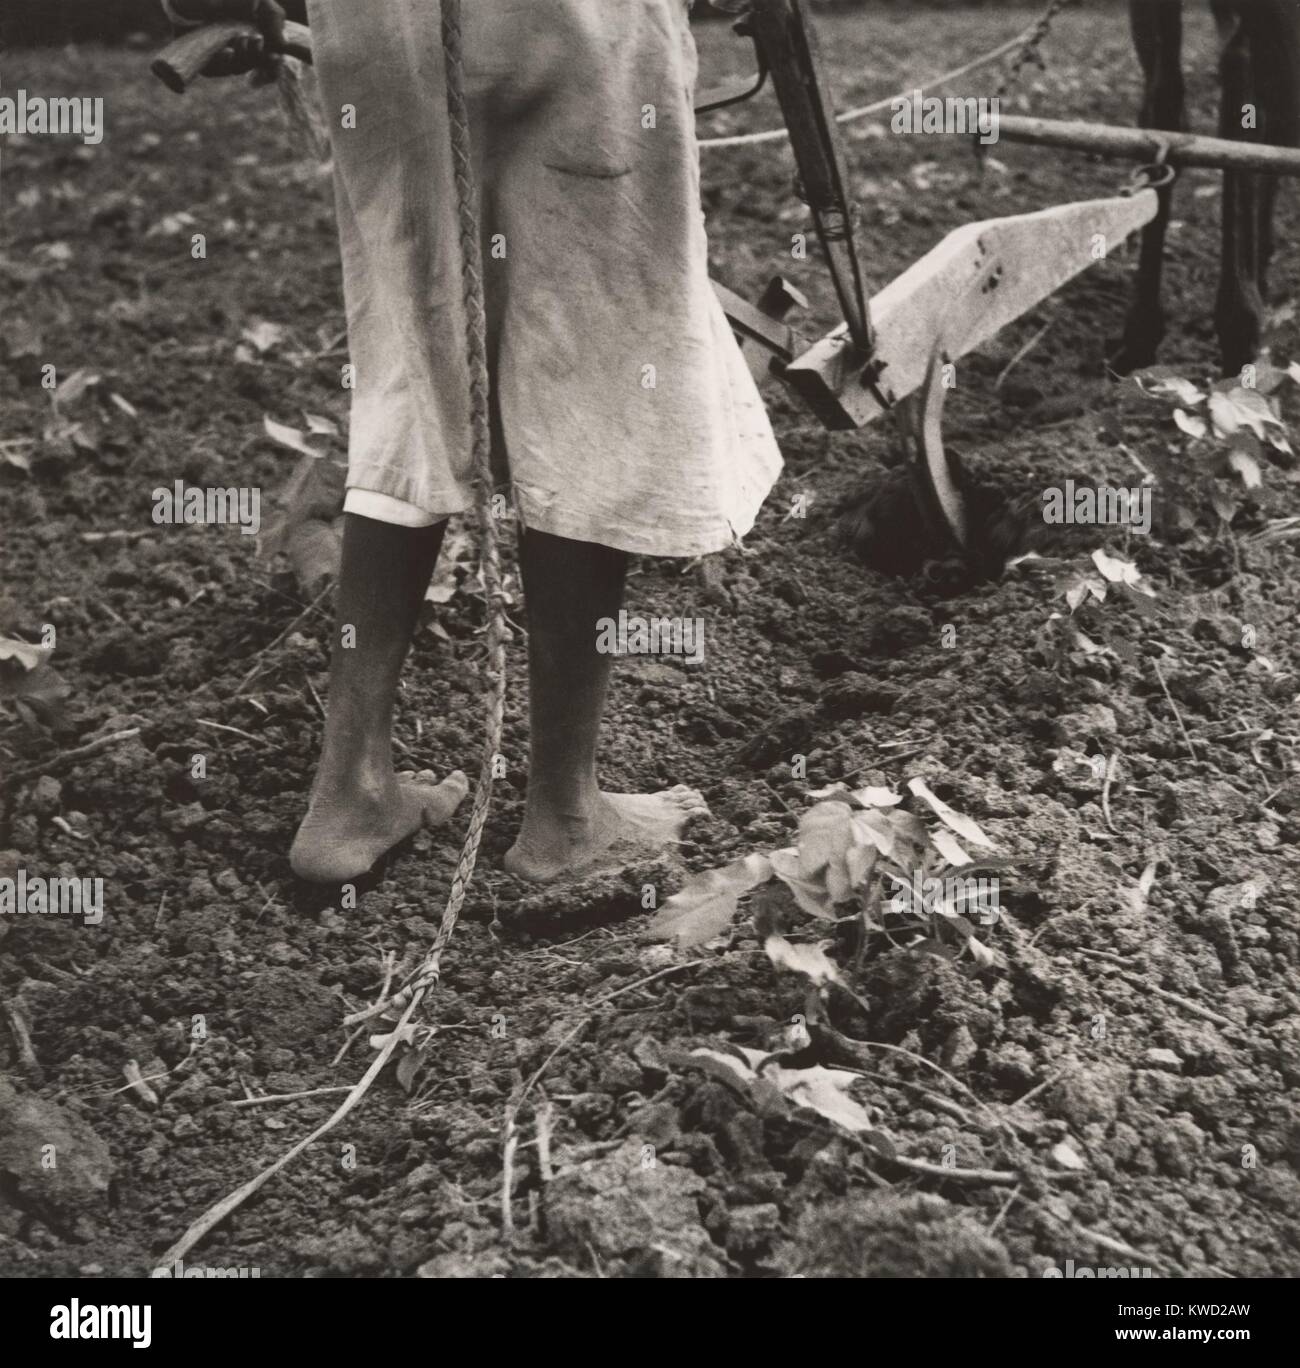 Alabama Plow Girl, near Eutaw, Alabama, 1936, by Dorothea Lange. The barefooted womans vulnerability hardship is emphasized by the rough soil, and the sharp arc of the single blade cultivator. She does heavy work. Pushing and pulling to guide to blade in coordination with the forward movement of the mule  (BSLOC 2017 20 94) Stock Photo